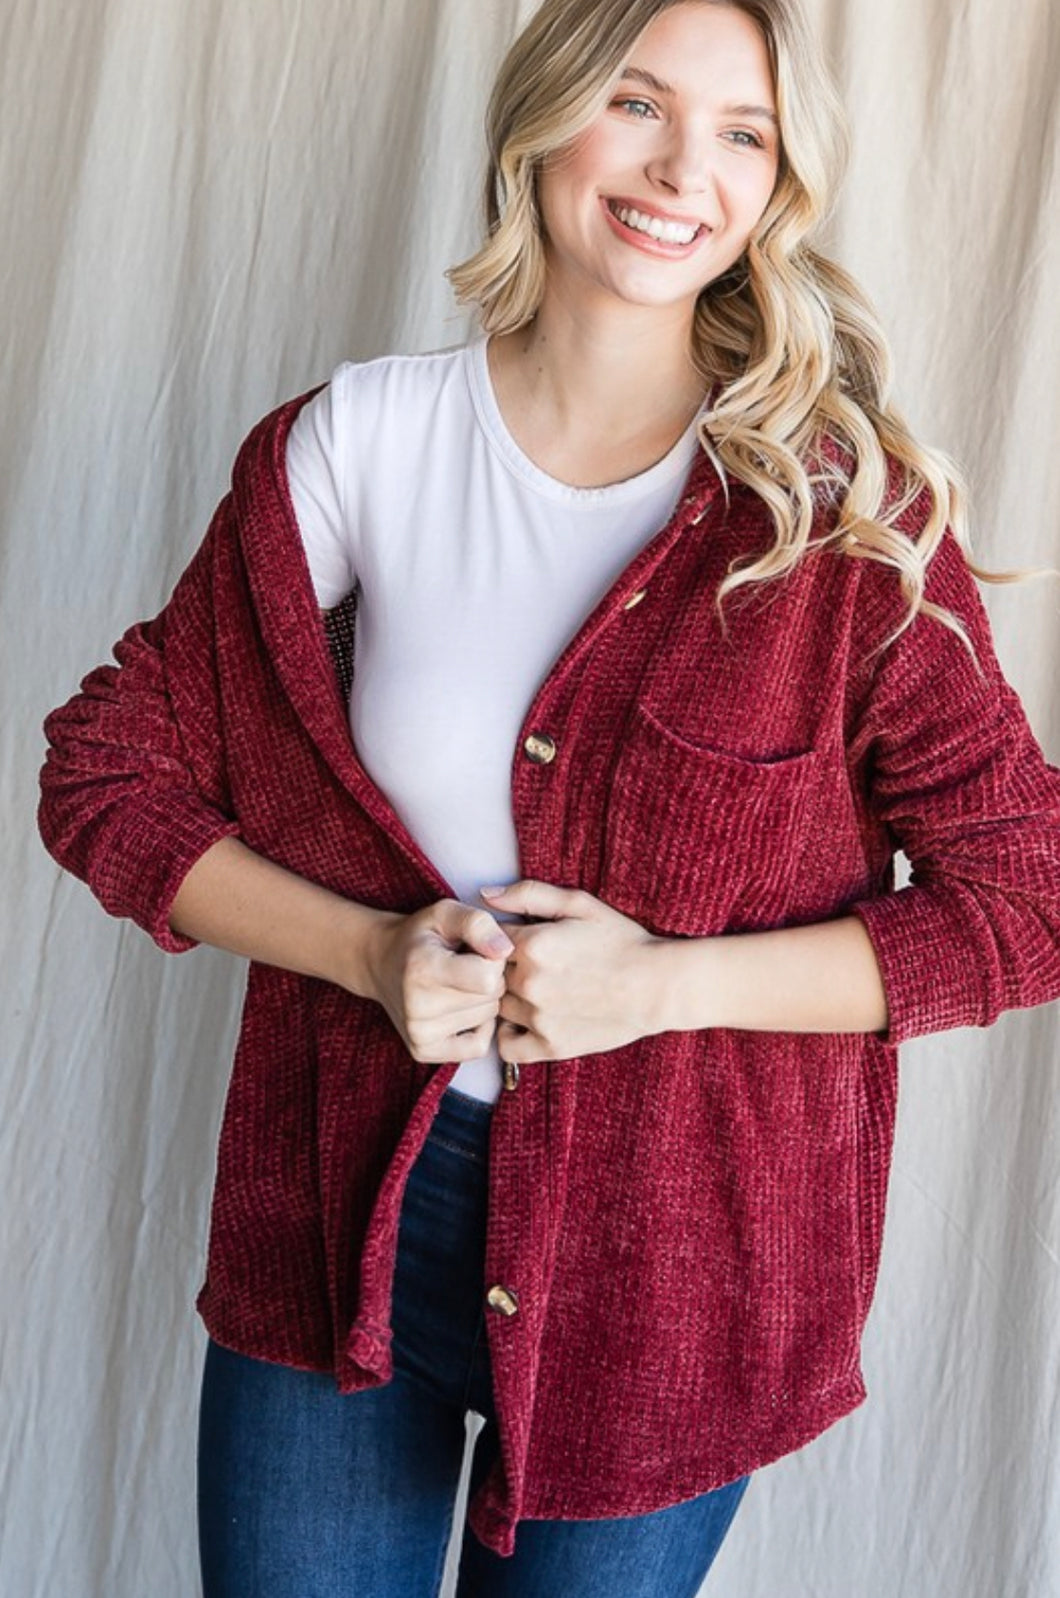 The Completer Top in Burgundy